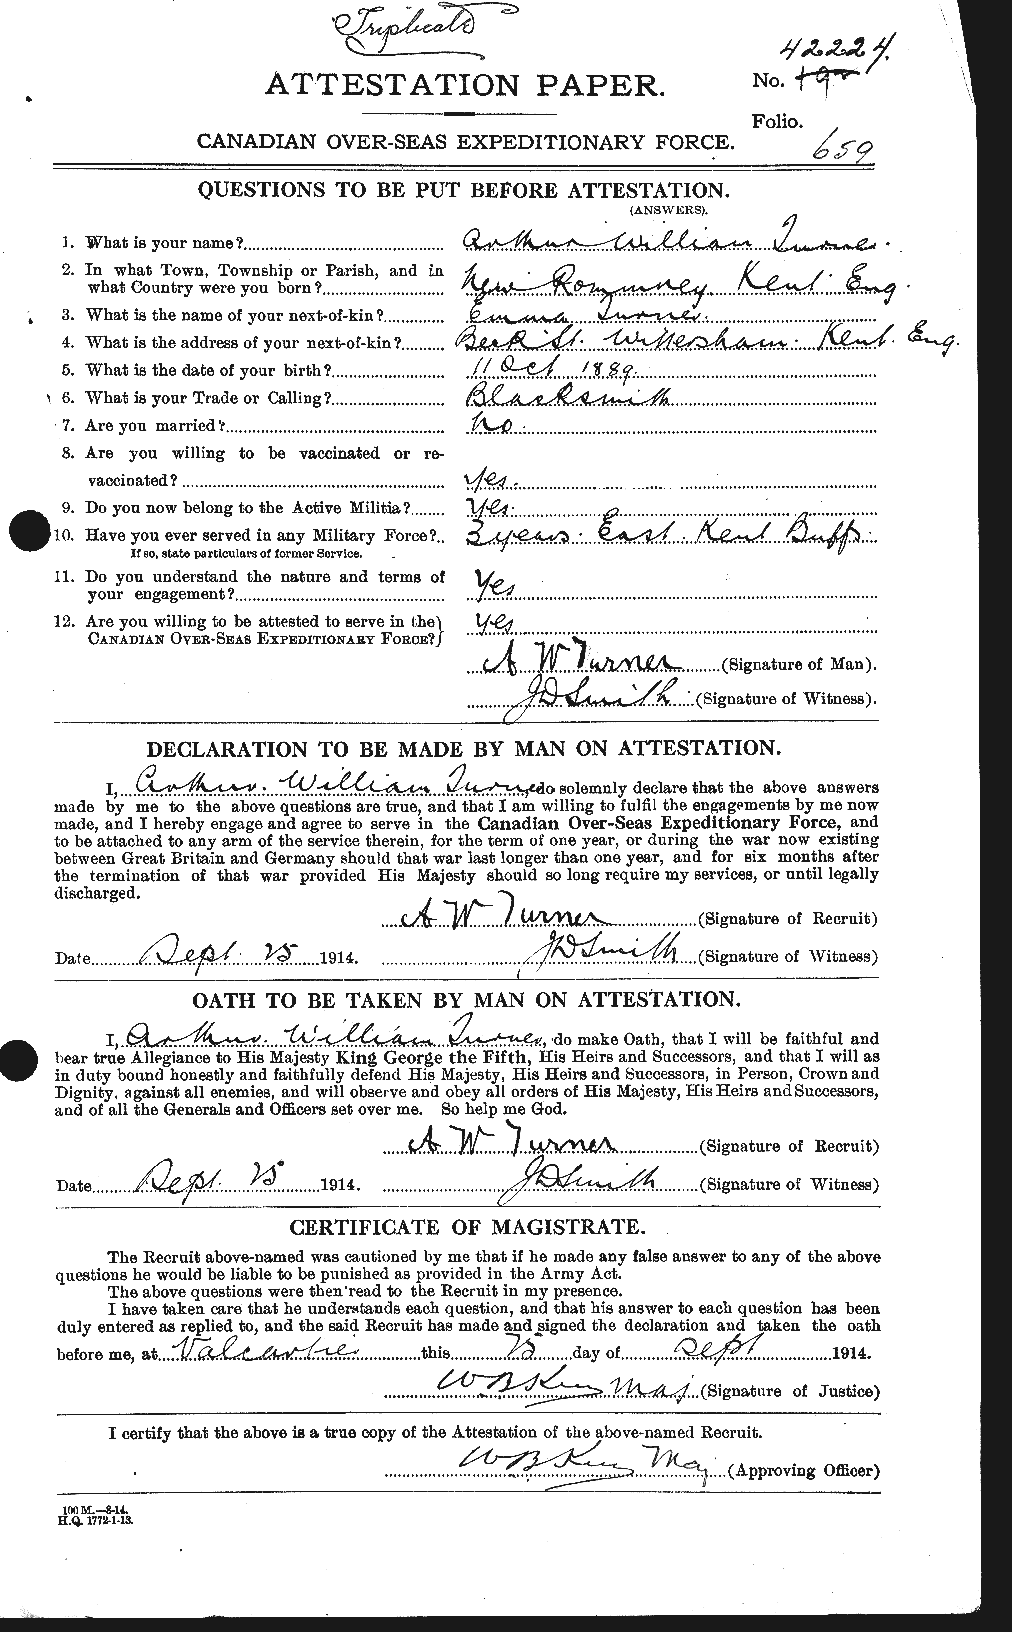 Personnel Records of the First World War - CEF 646330a